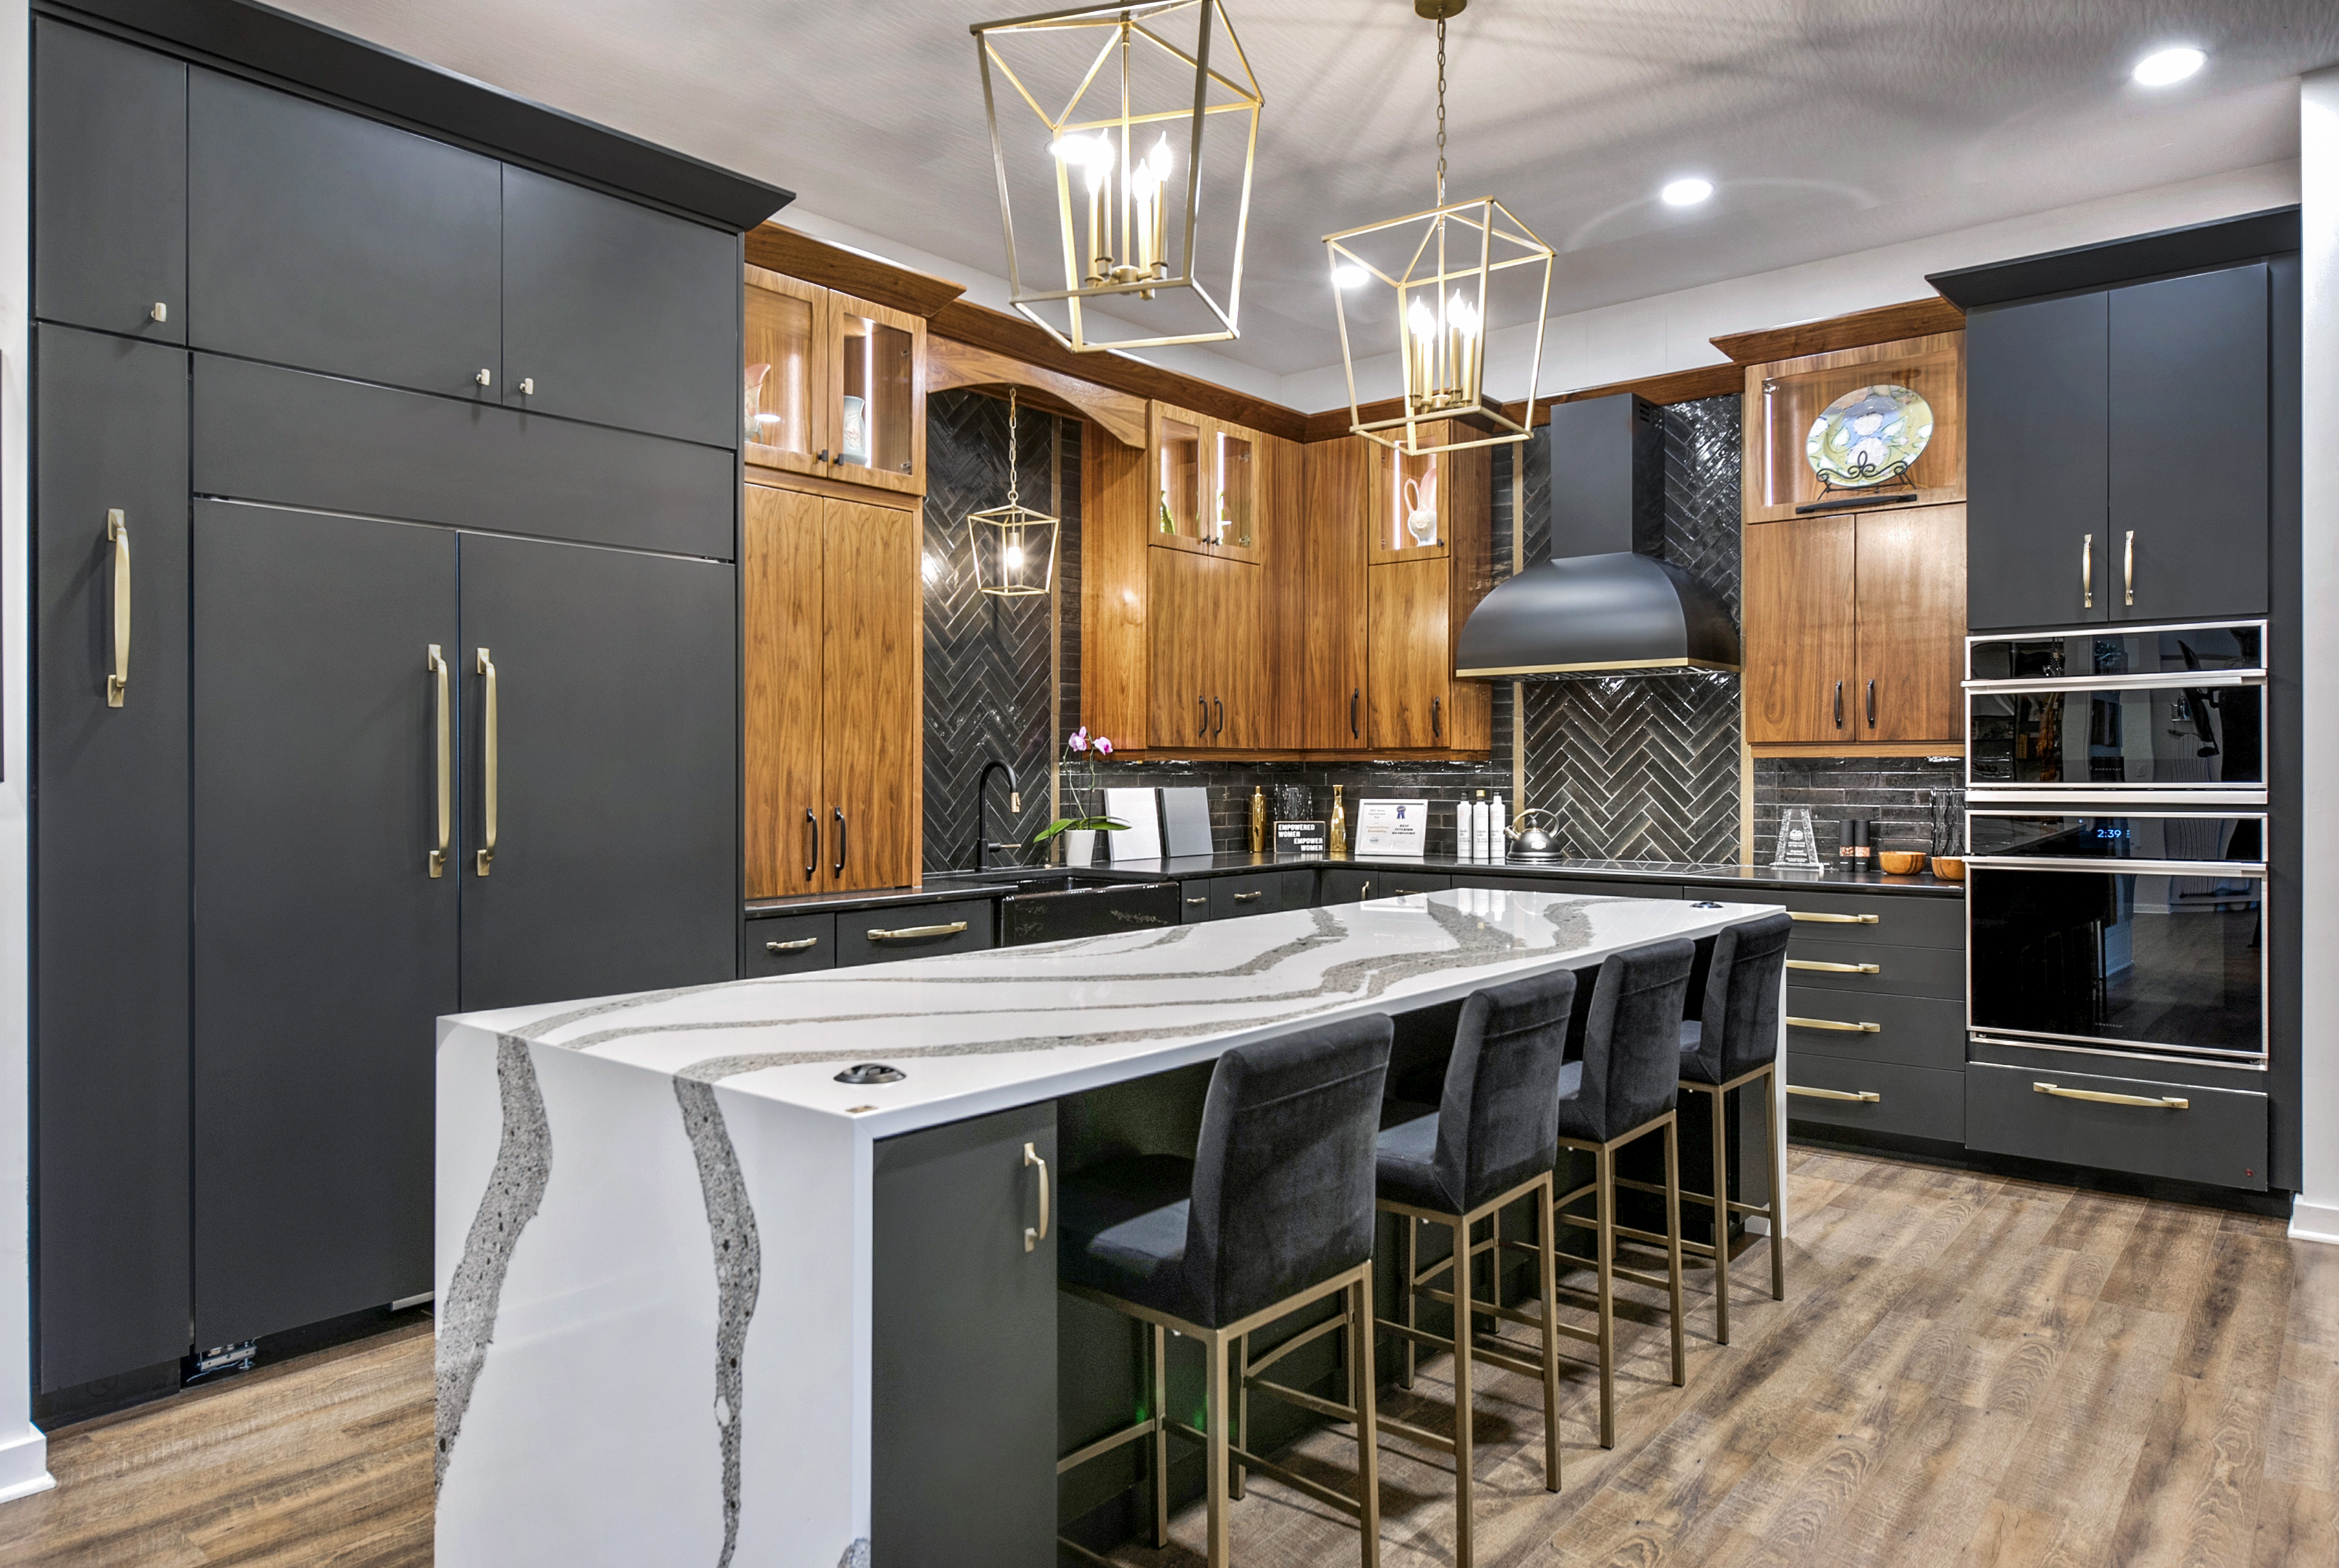 Classic kitchen design with grey kitchen cabinets and quartz kitchen countertops, incorporating a sleek range hood